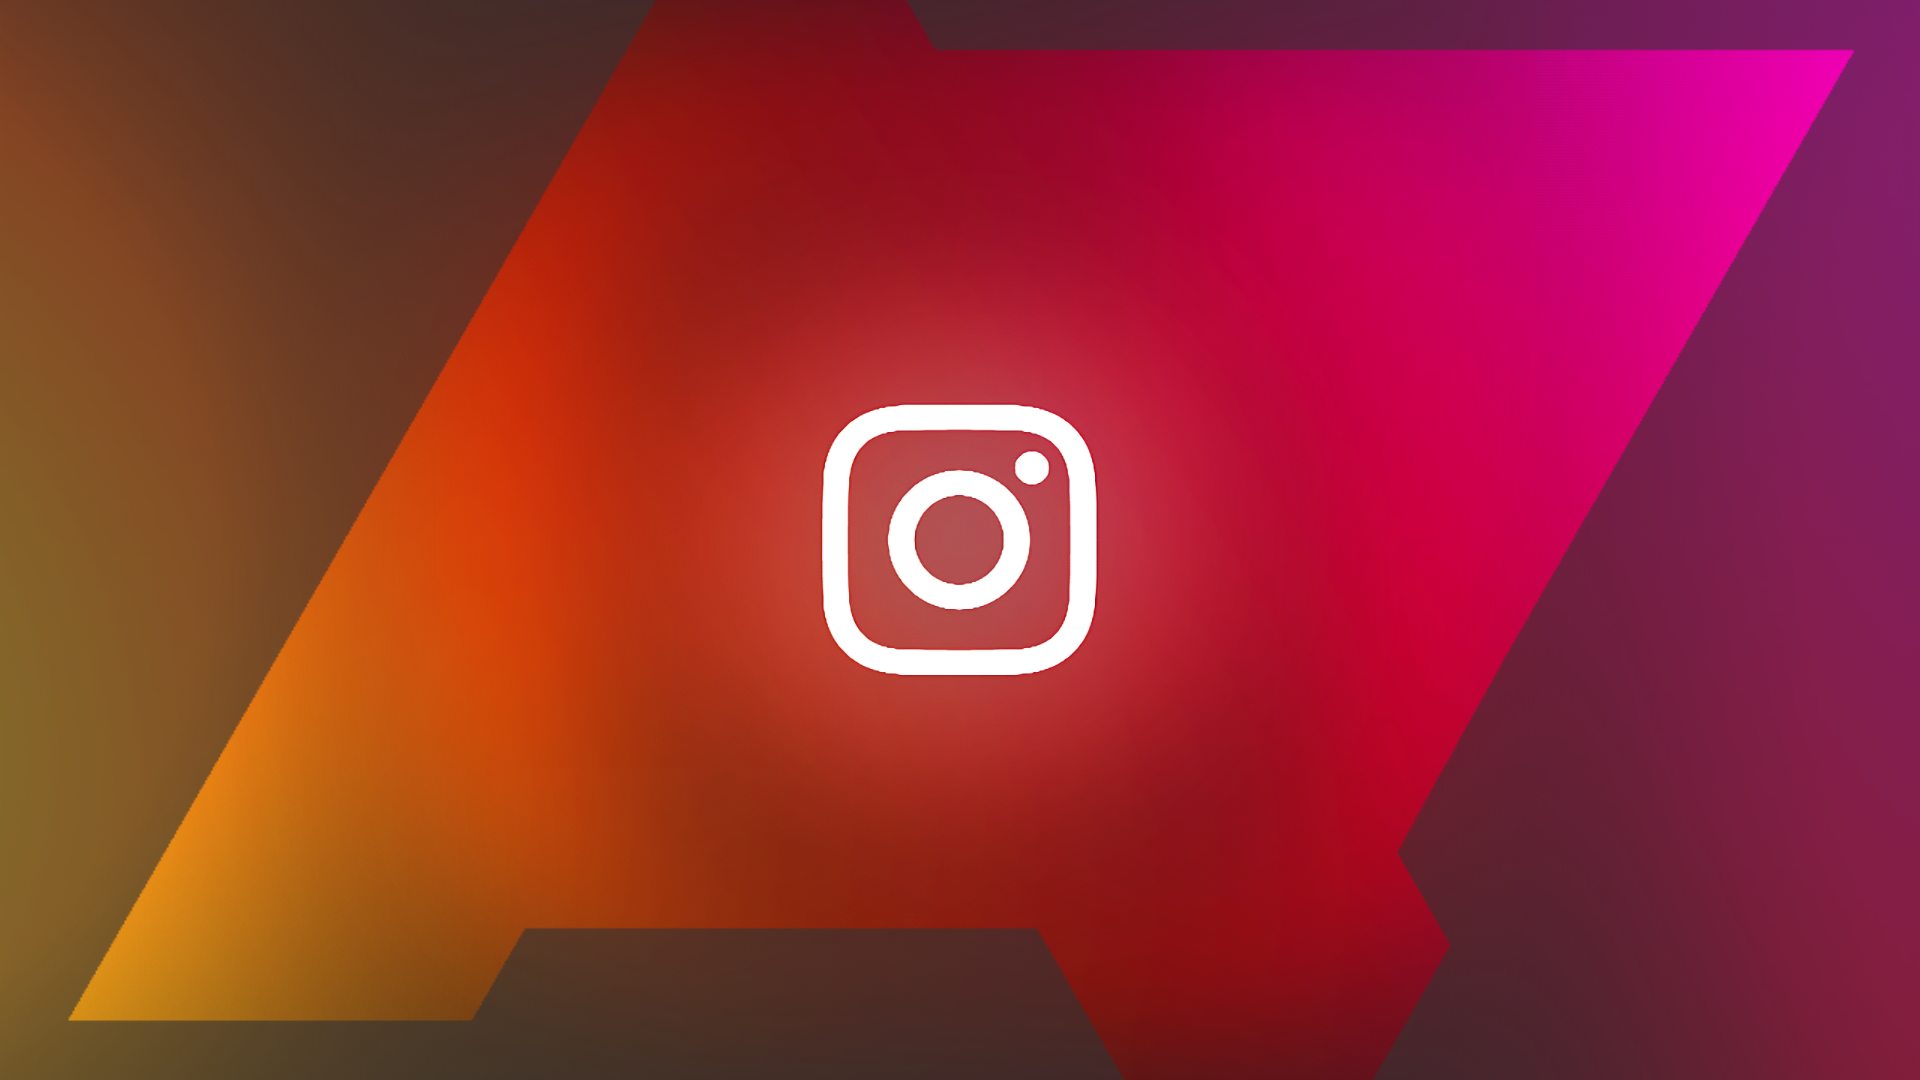 Instagram finally uses a dynamic theme for the app icon on Android